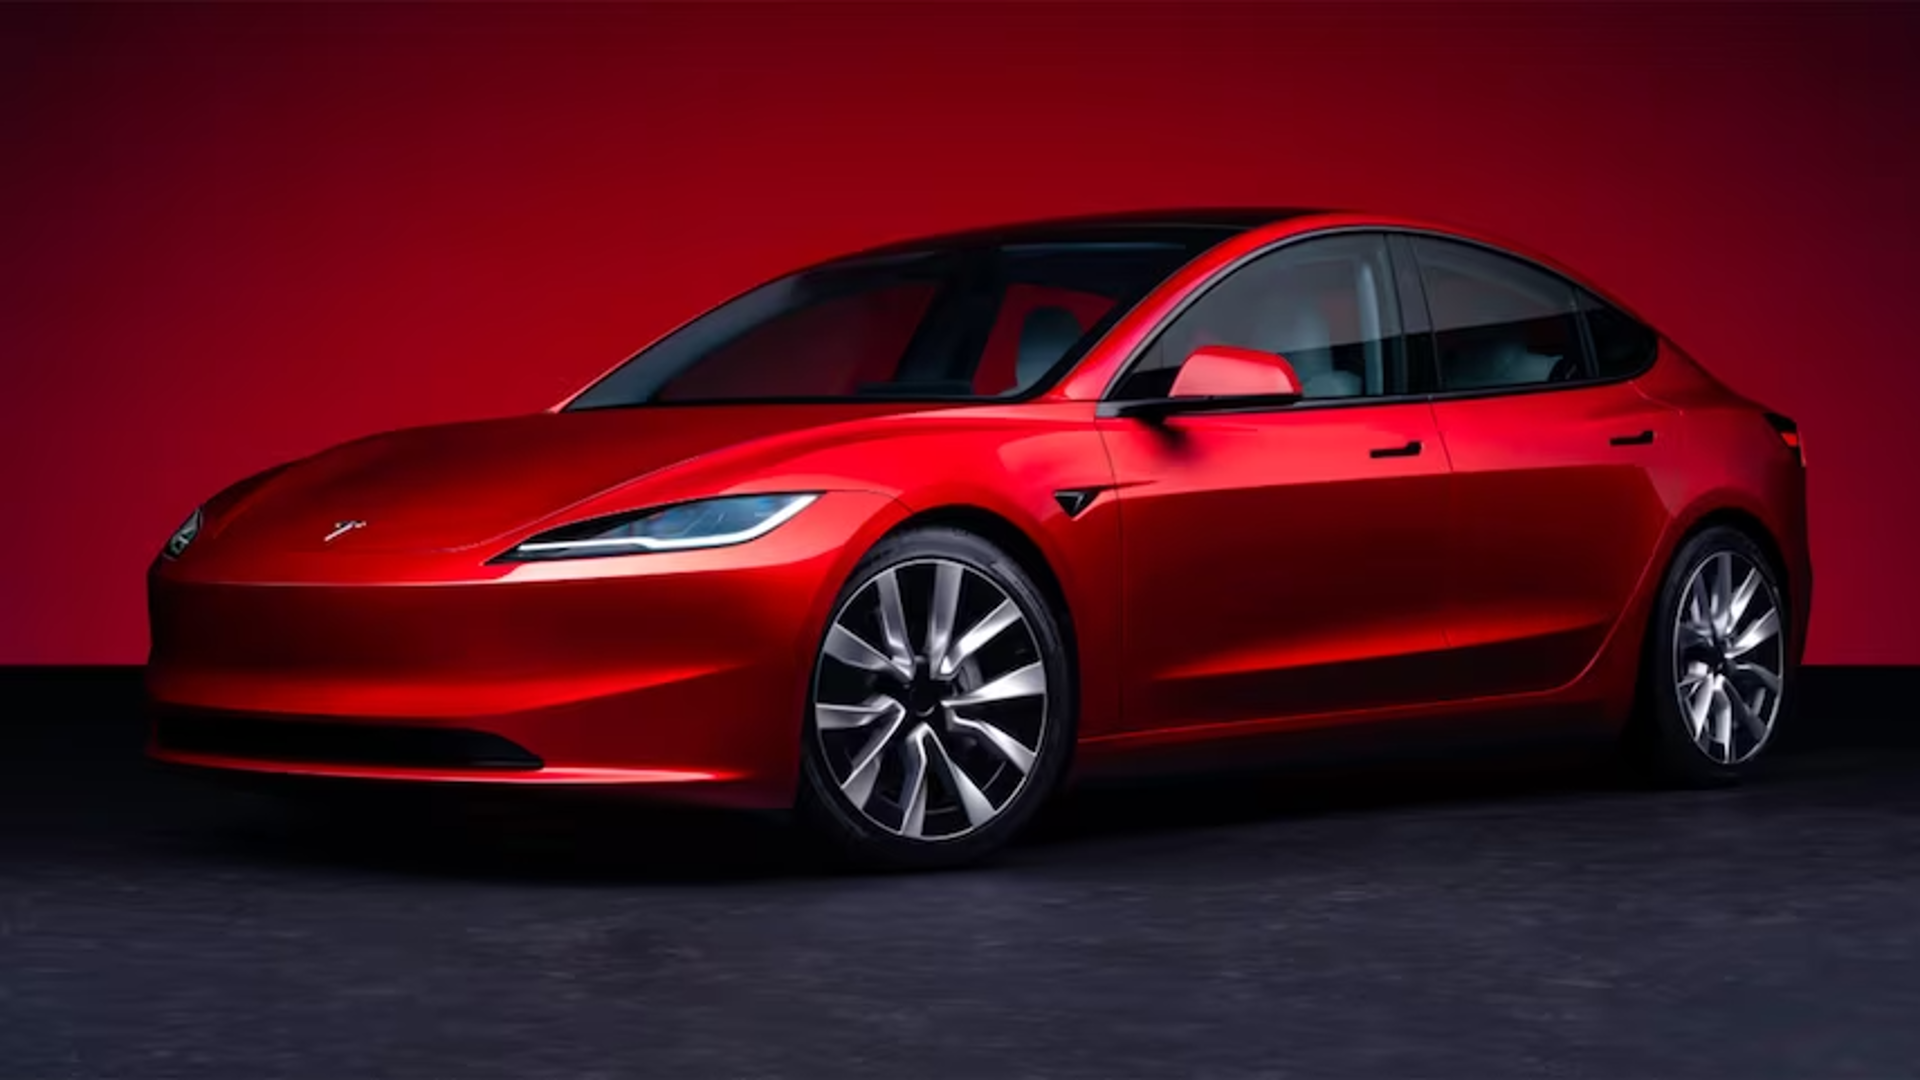 What You Need To Know Before Buying A Tesla